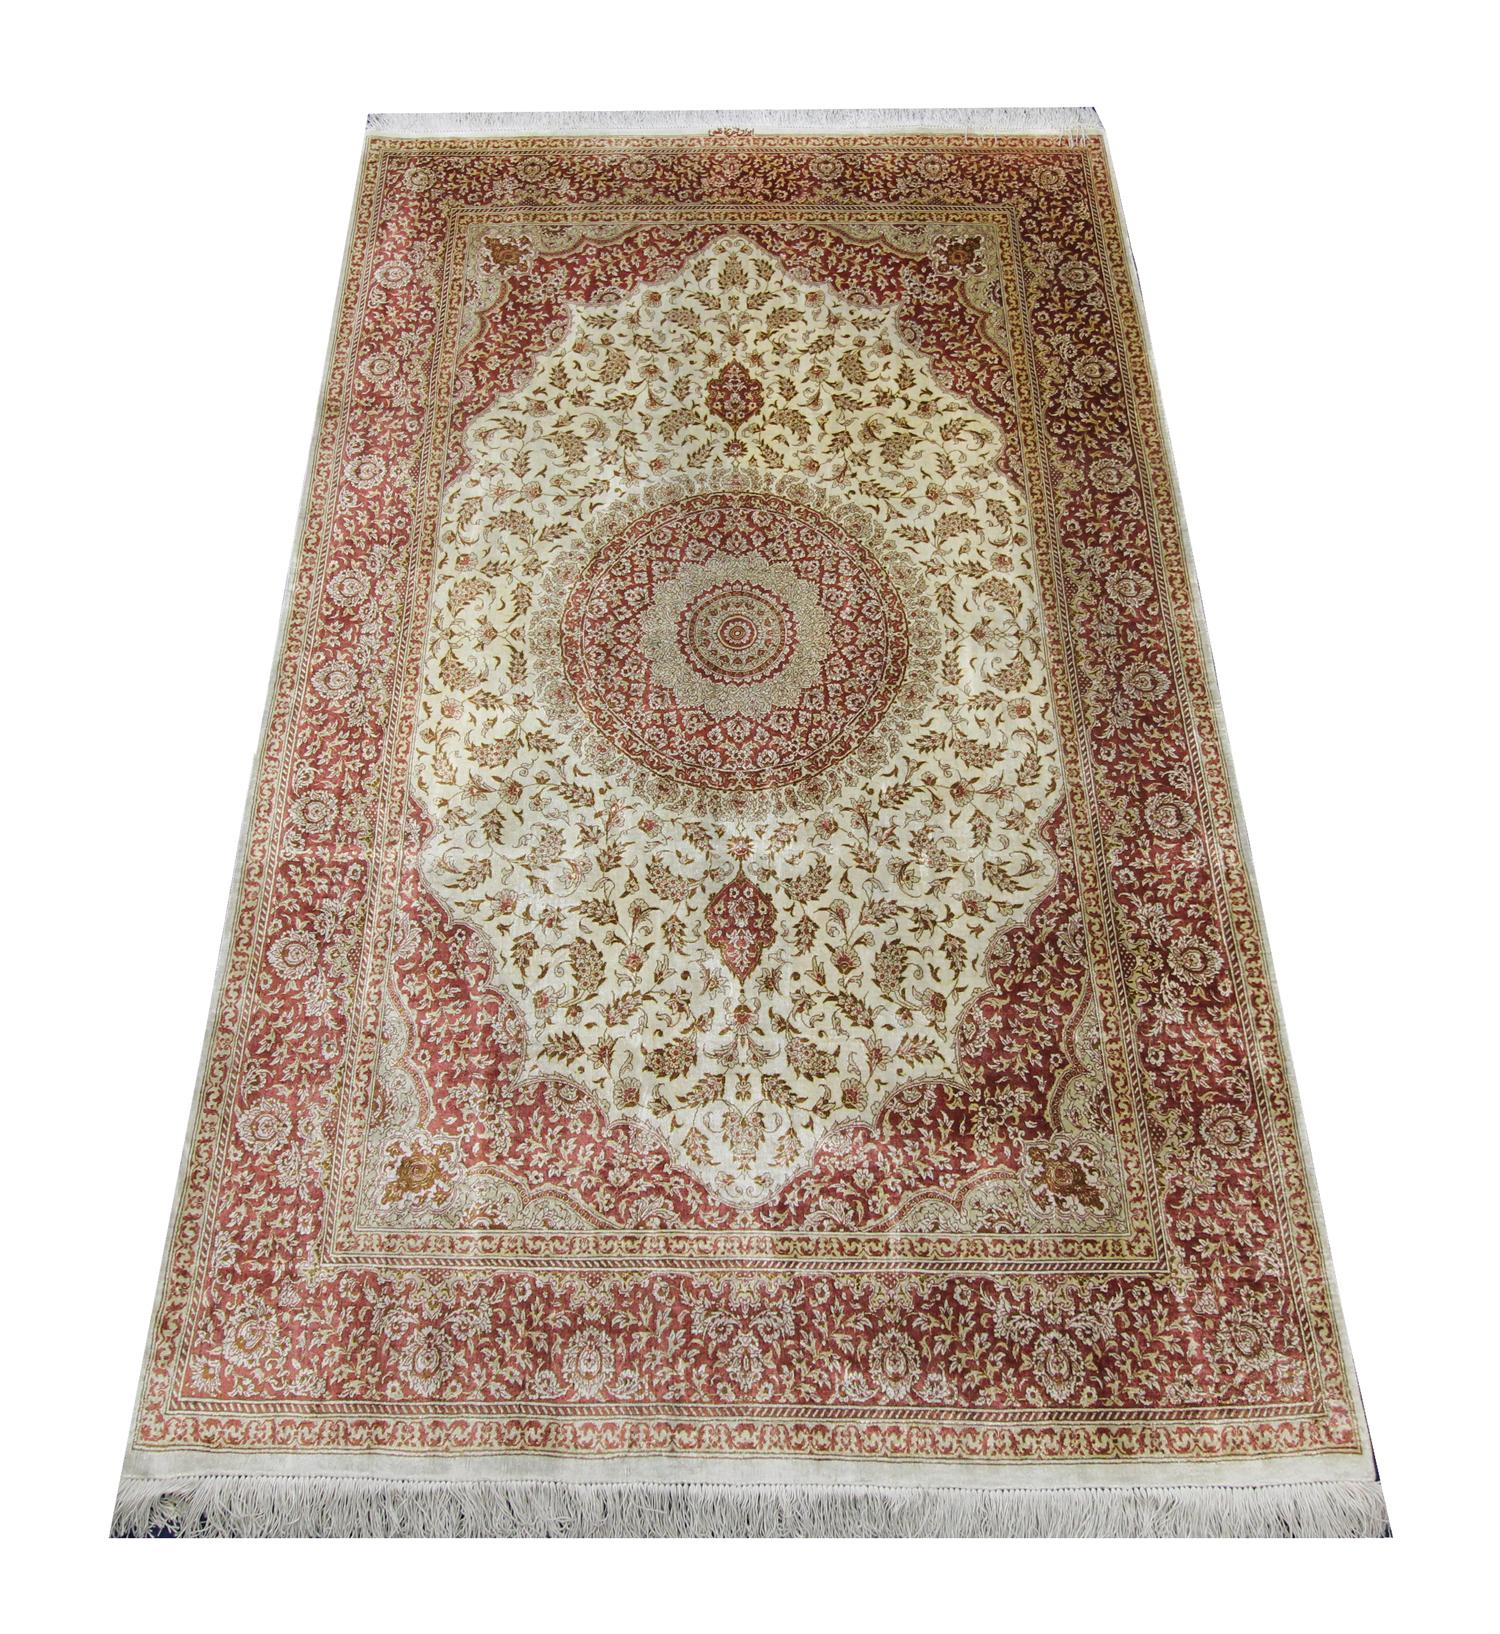 This elegant tribal silk rug was constructed in 1990 in Turkey. The central design features an ivory background with accents of red and beige that make up the symmetrical flowing design. This fine oriental rug combines simple colours with